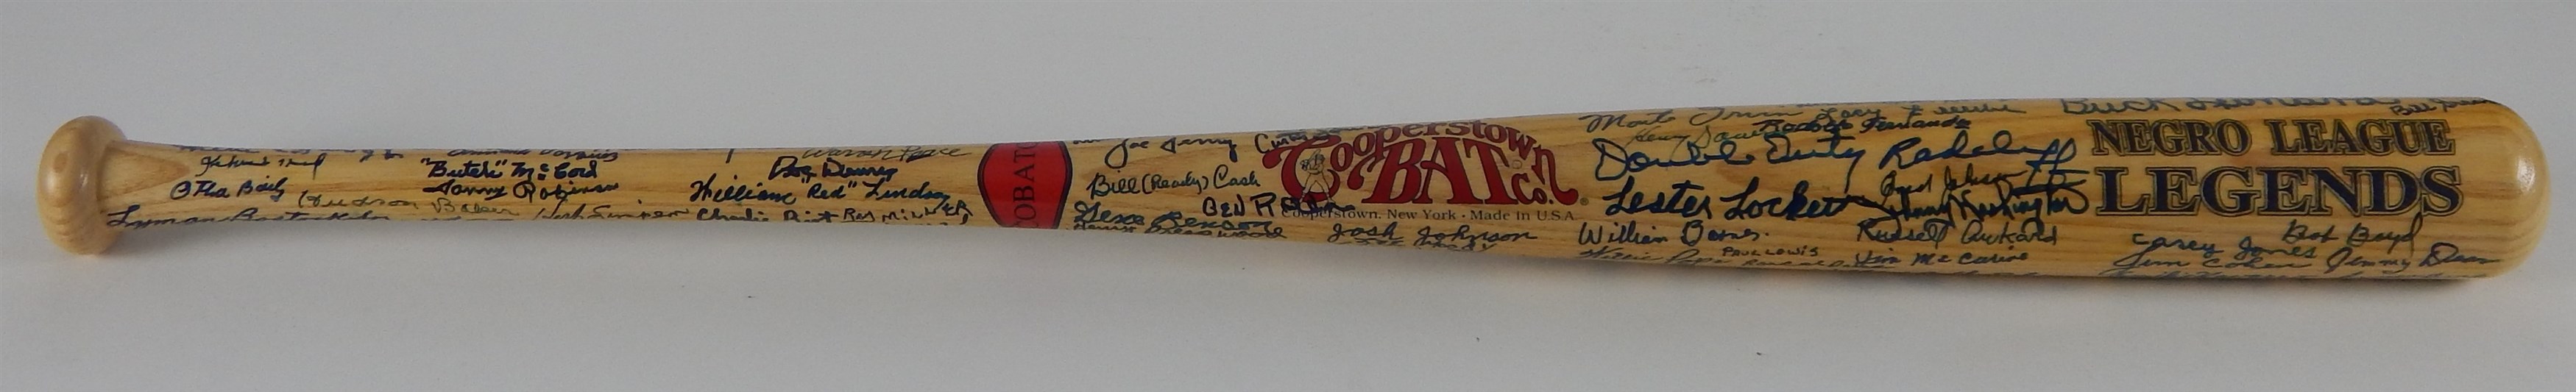 - Negro League Legends Cooperstown Signature Bat Covered in Autographs!